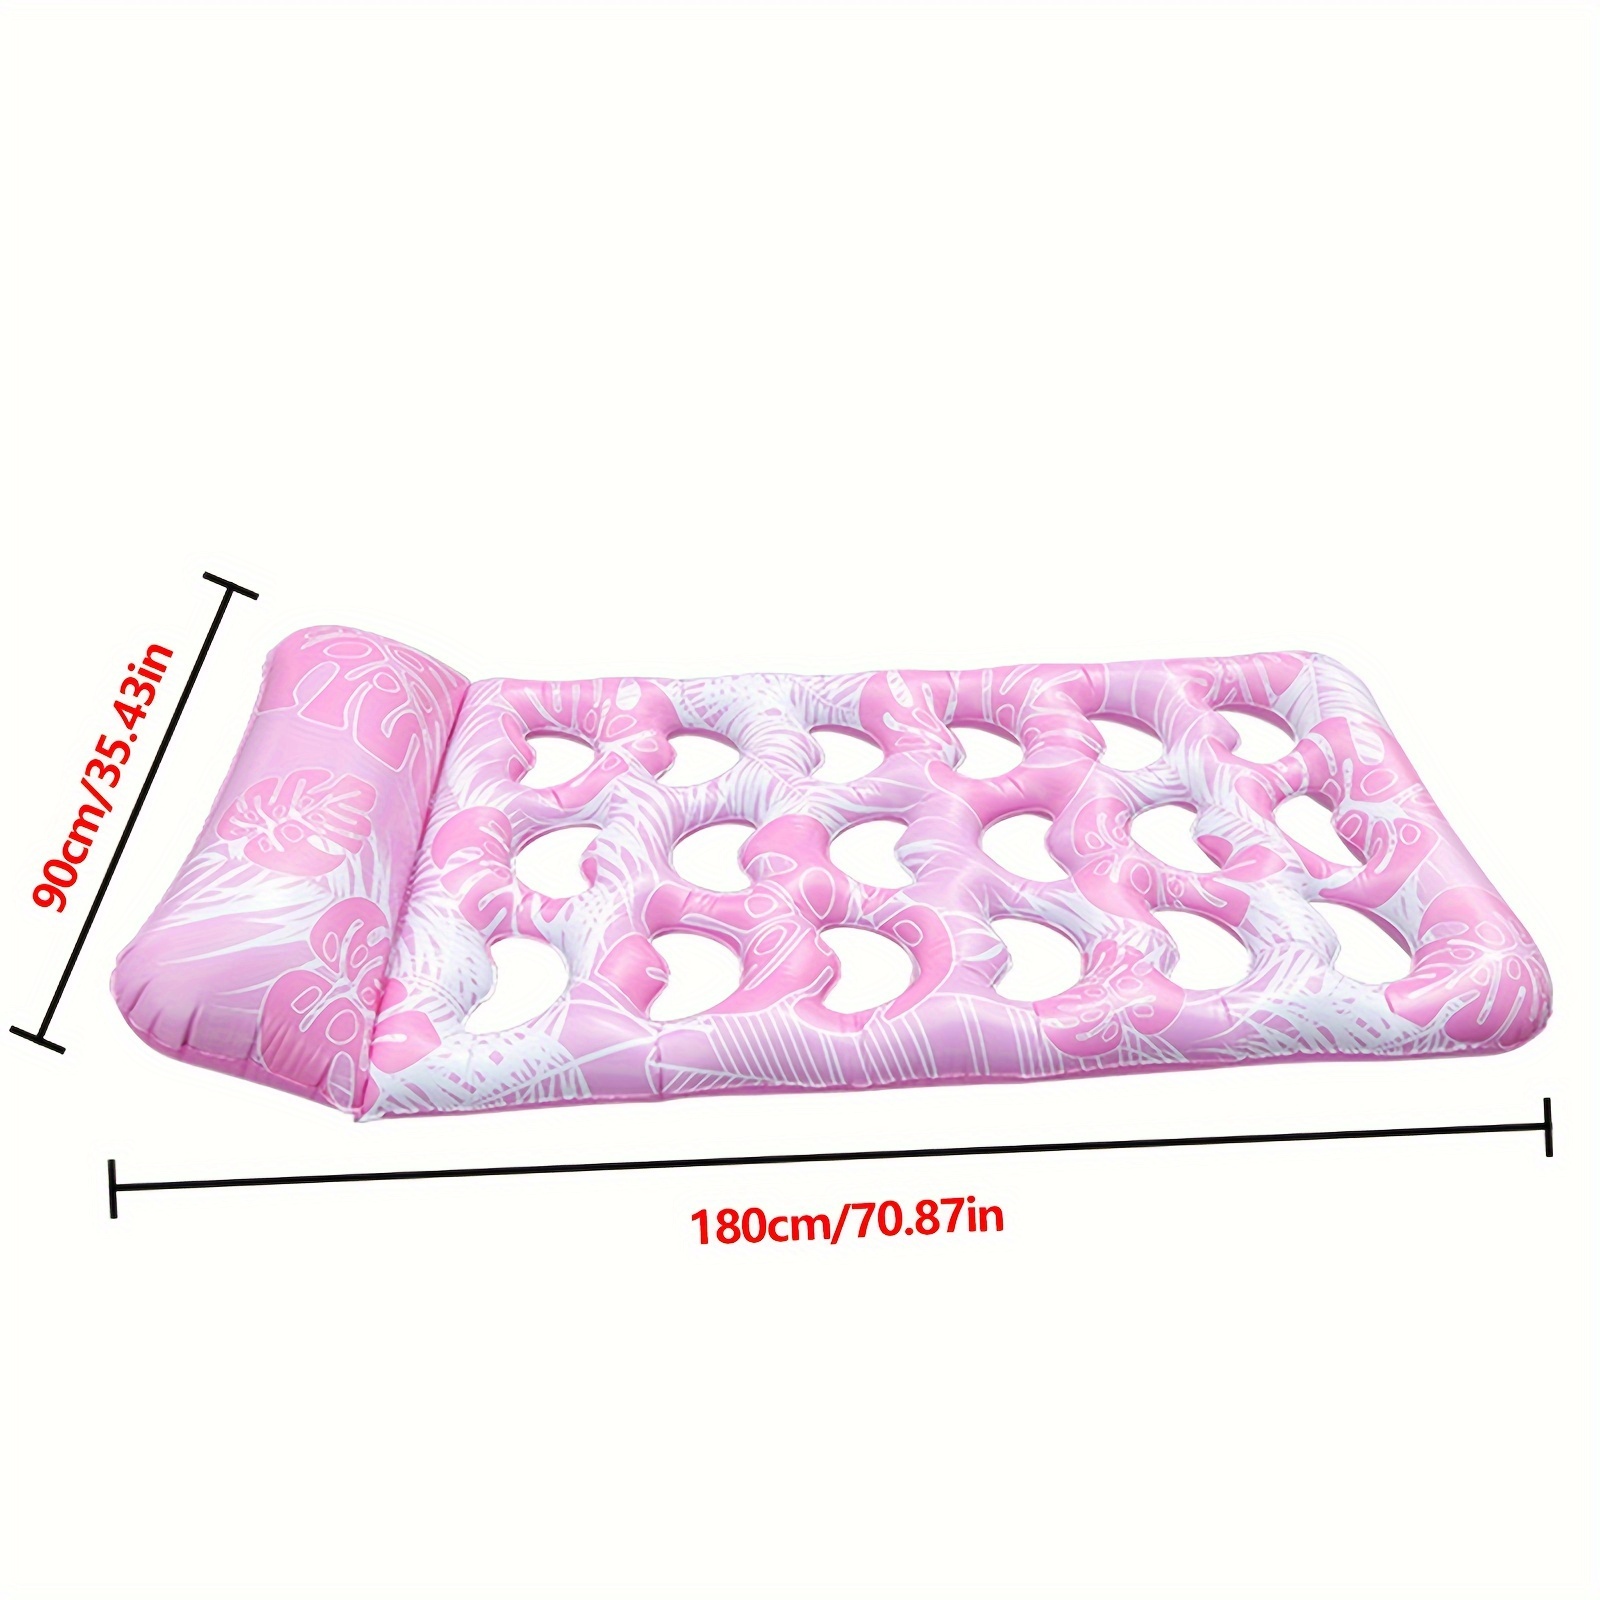 1pc Pvc Water Hammock, Inflatable Floating Swimming Bed, Suitable For ...